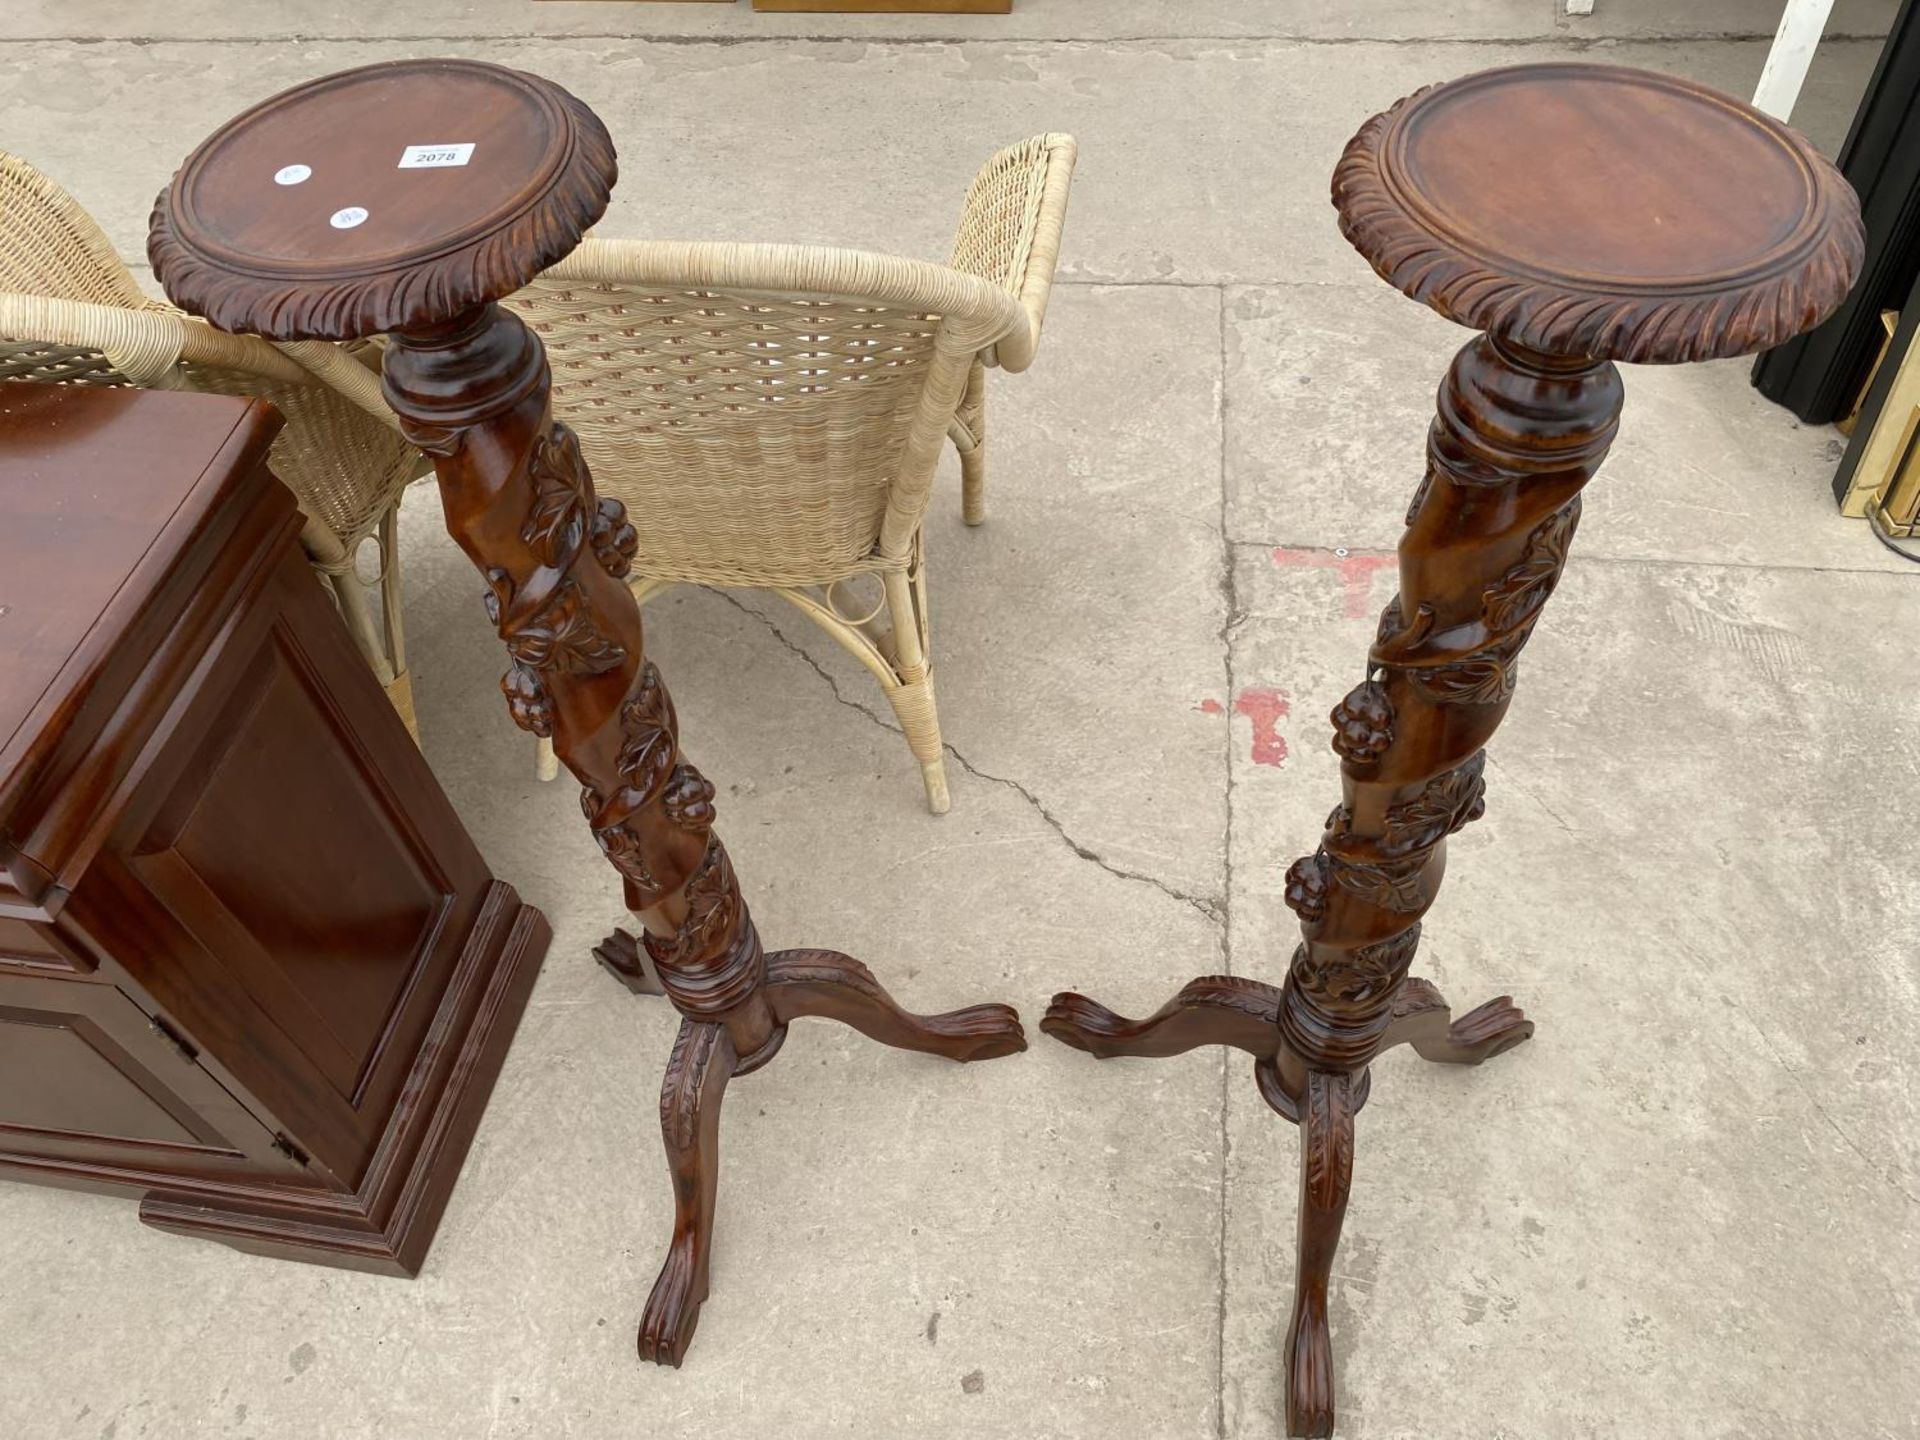 A PAIR OF VICTORIAN STYLE MAHOGANY TORCHERES ON TRIPOD BASES WITH FRUIT AND LEAF COLUMN DECORATION - Image 2 of 6